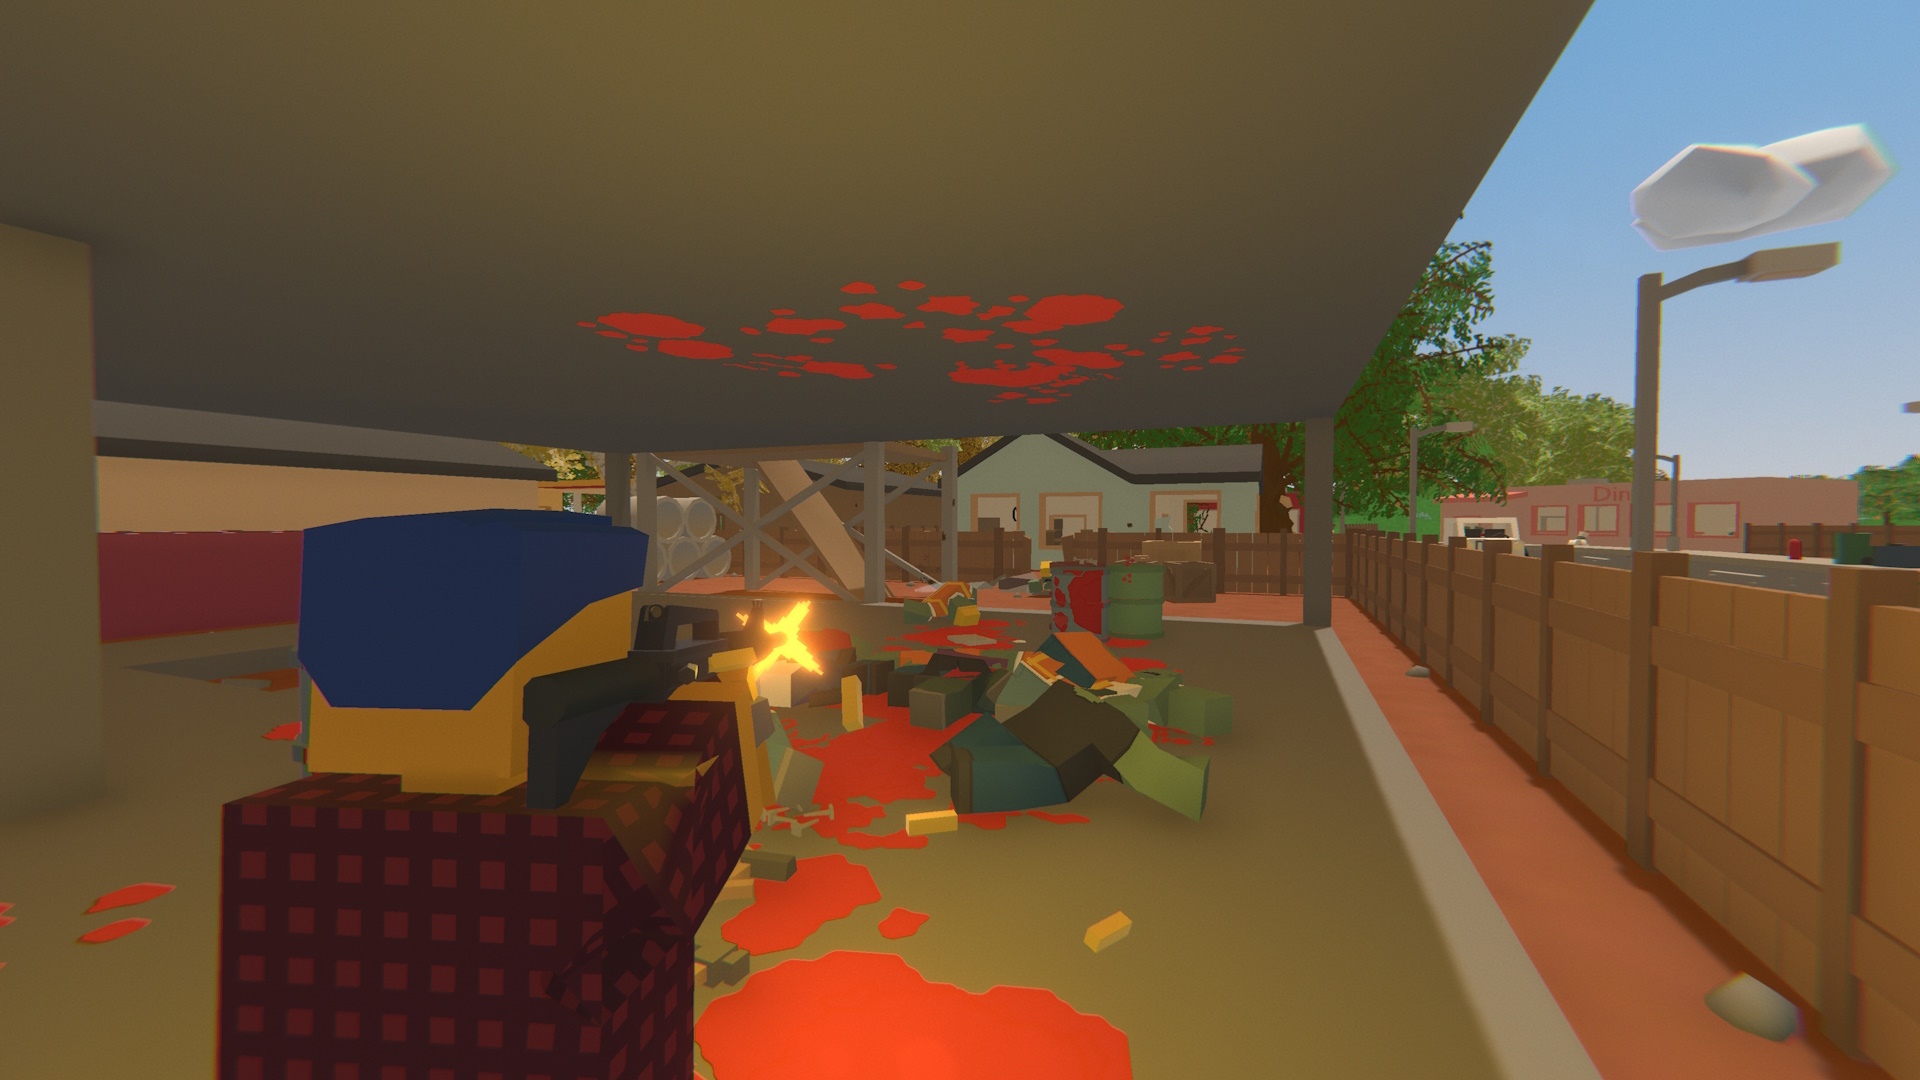 Unturned - a character fires a gun at zombies inside a building